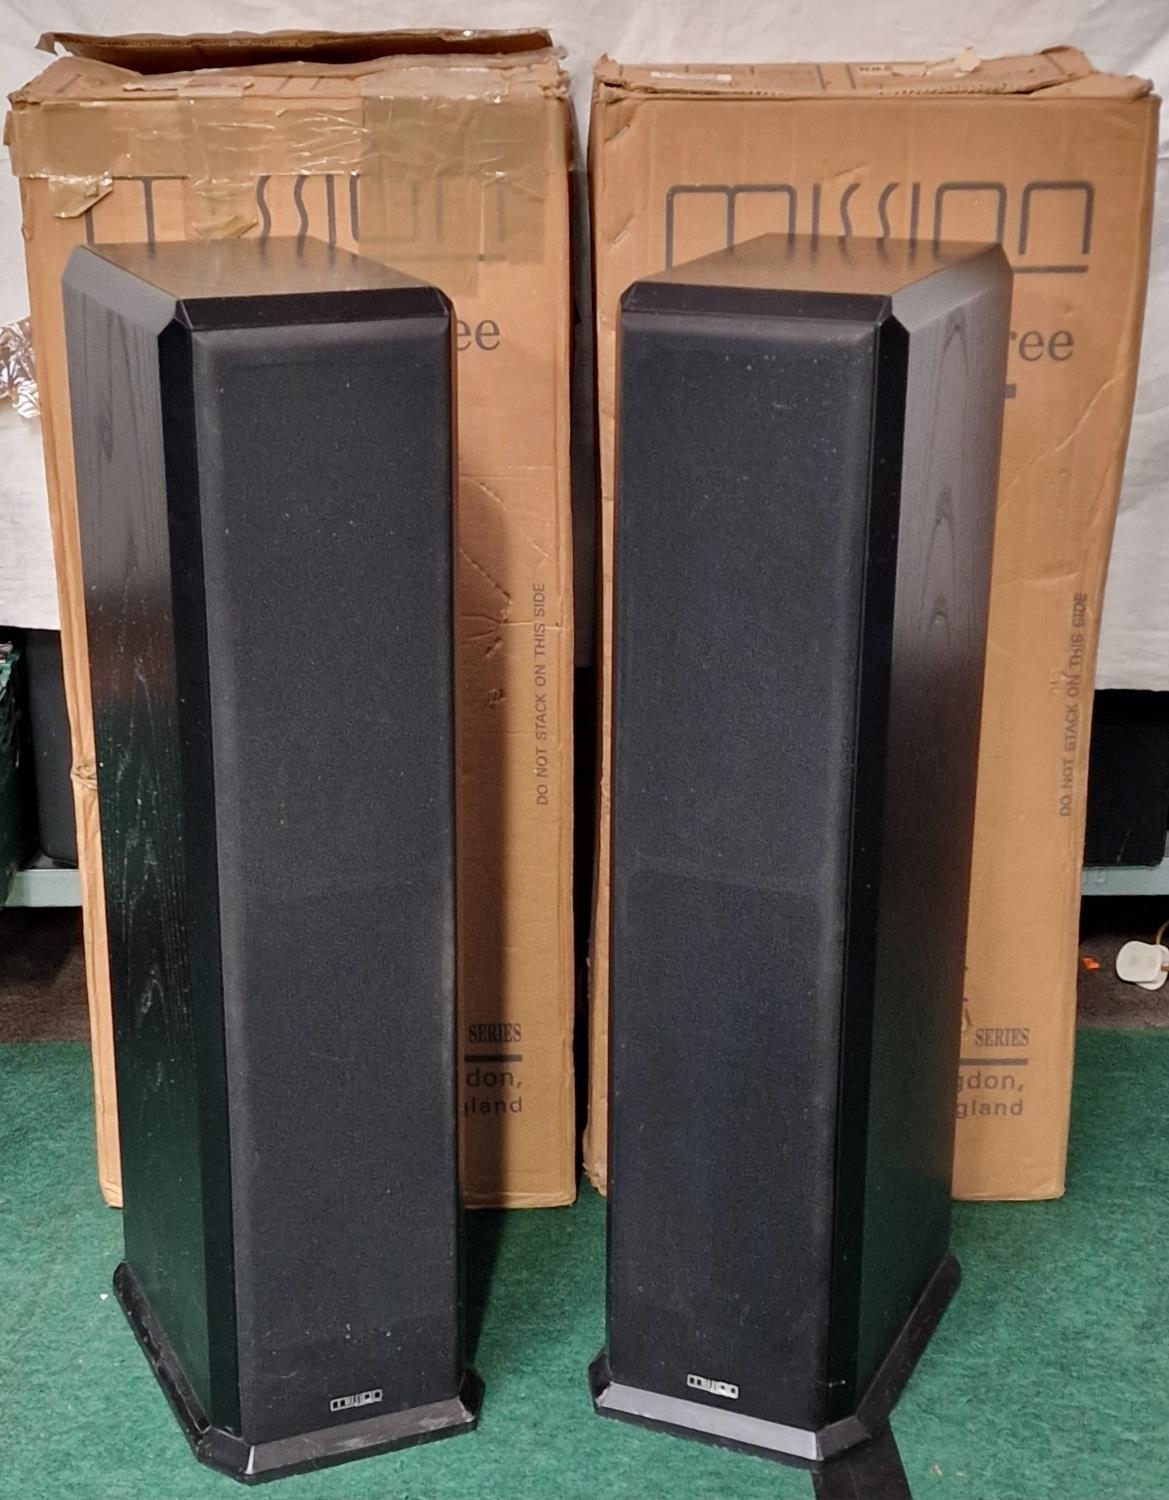 Mission 753 Floor Standing Speakers found here in black cabinets and having their original boxes.